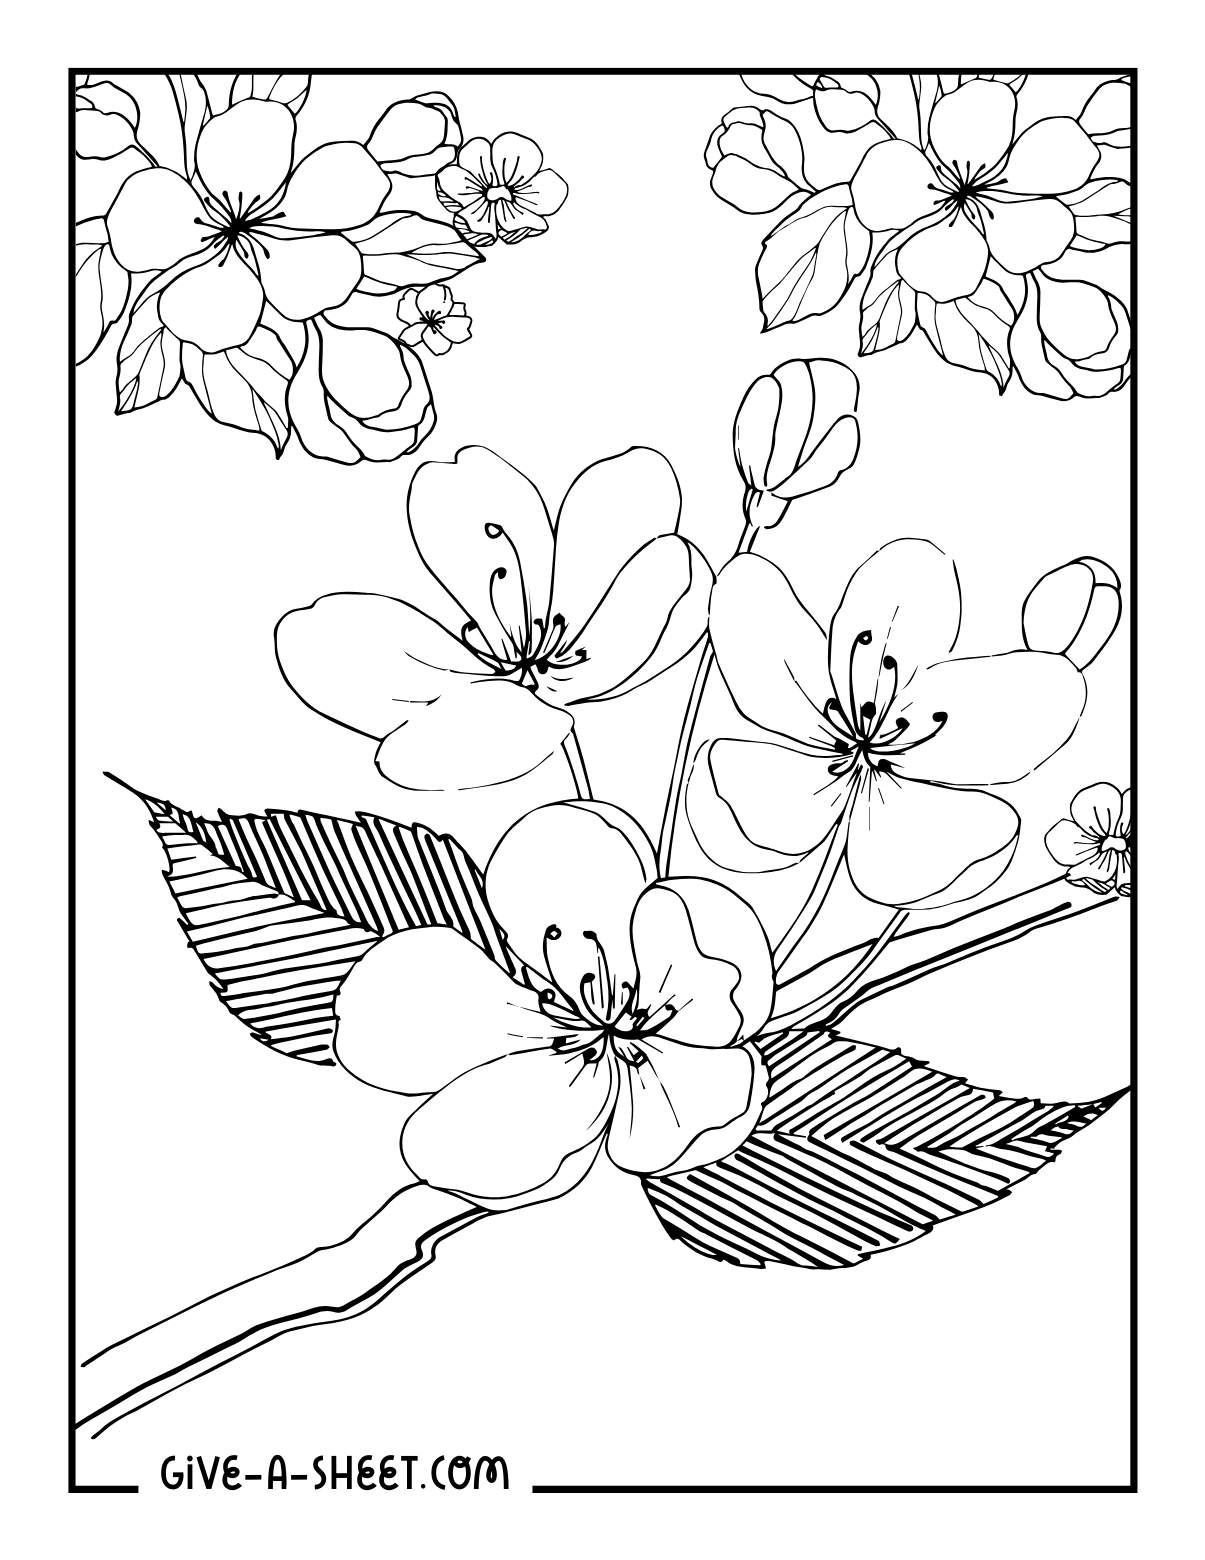 Apple blossoms tree coloring page.